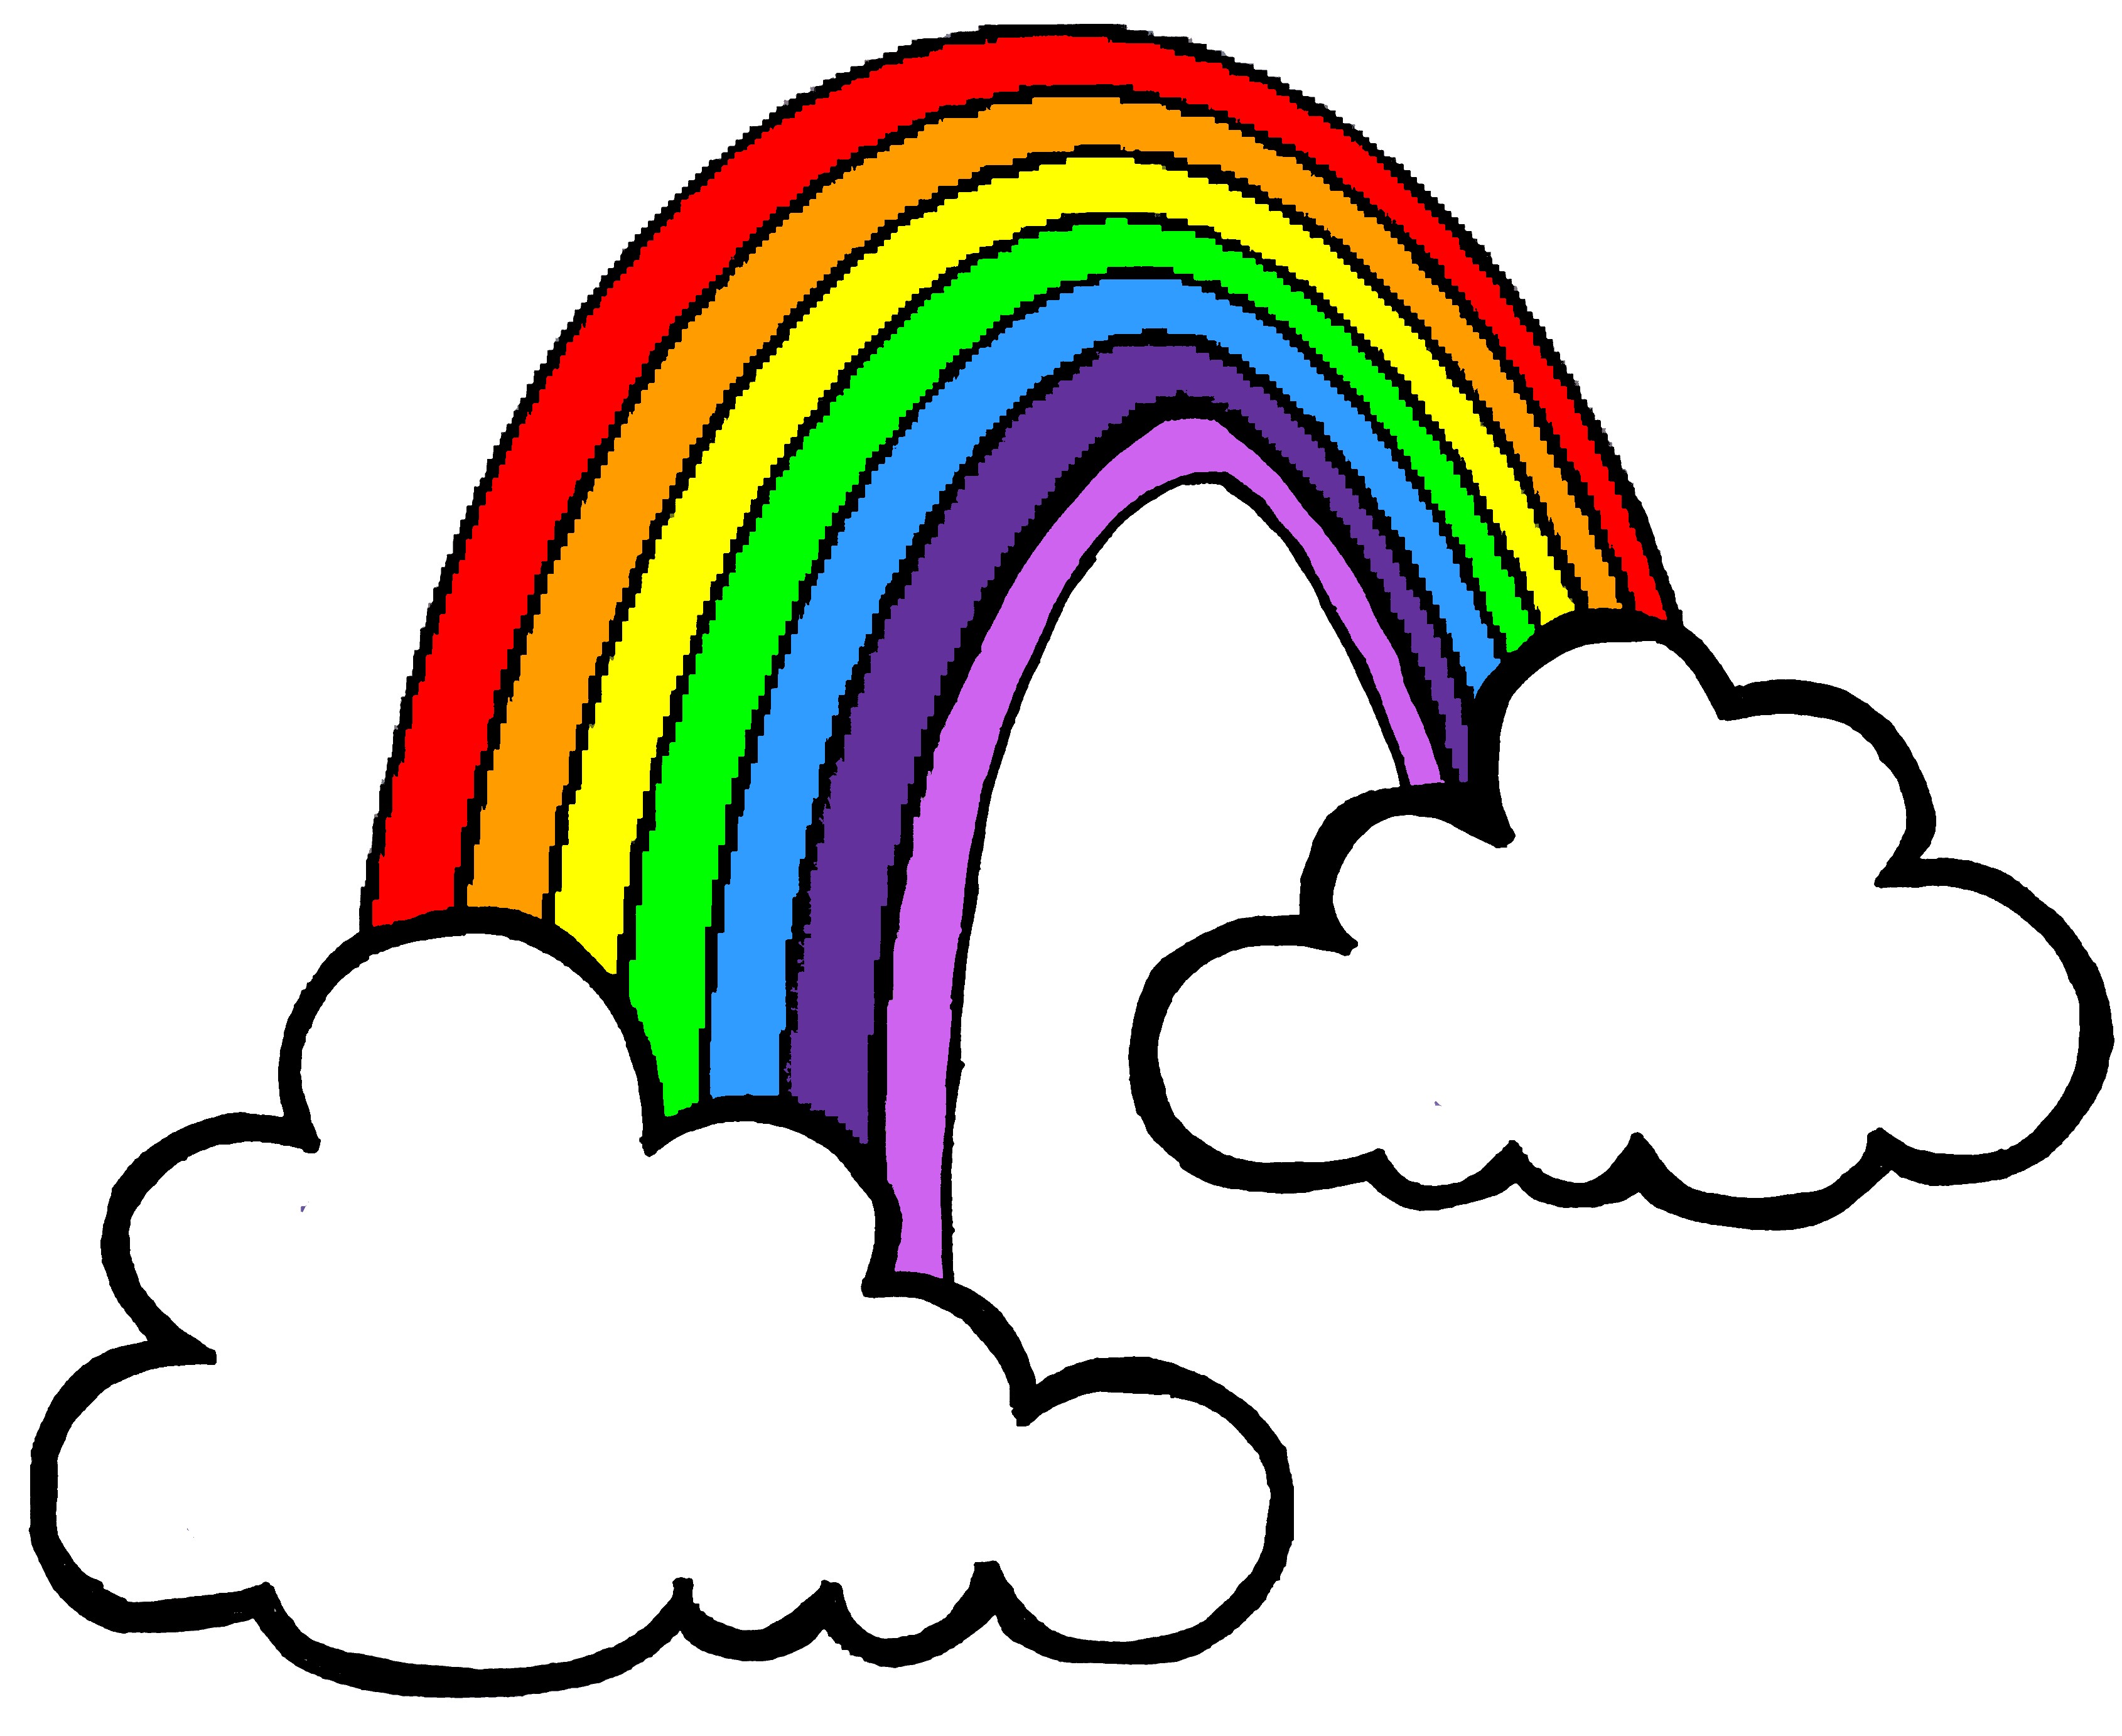 Black and white rainbow outline free clipart images 2 - Cliparting.com